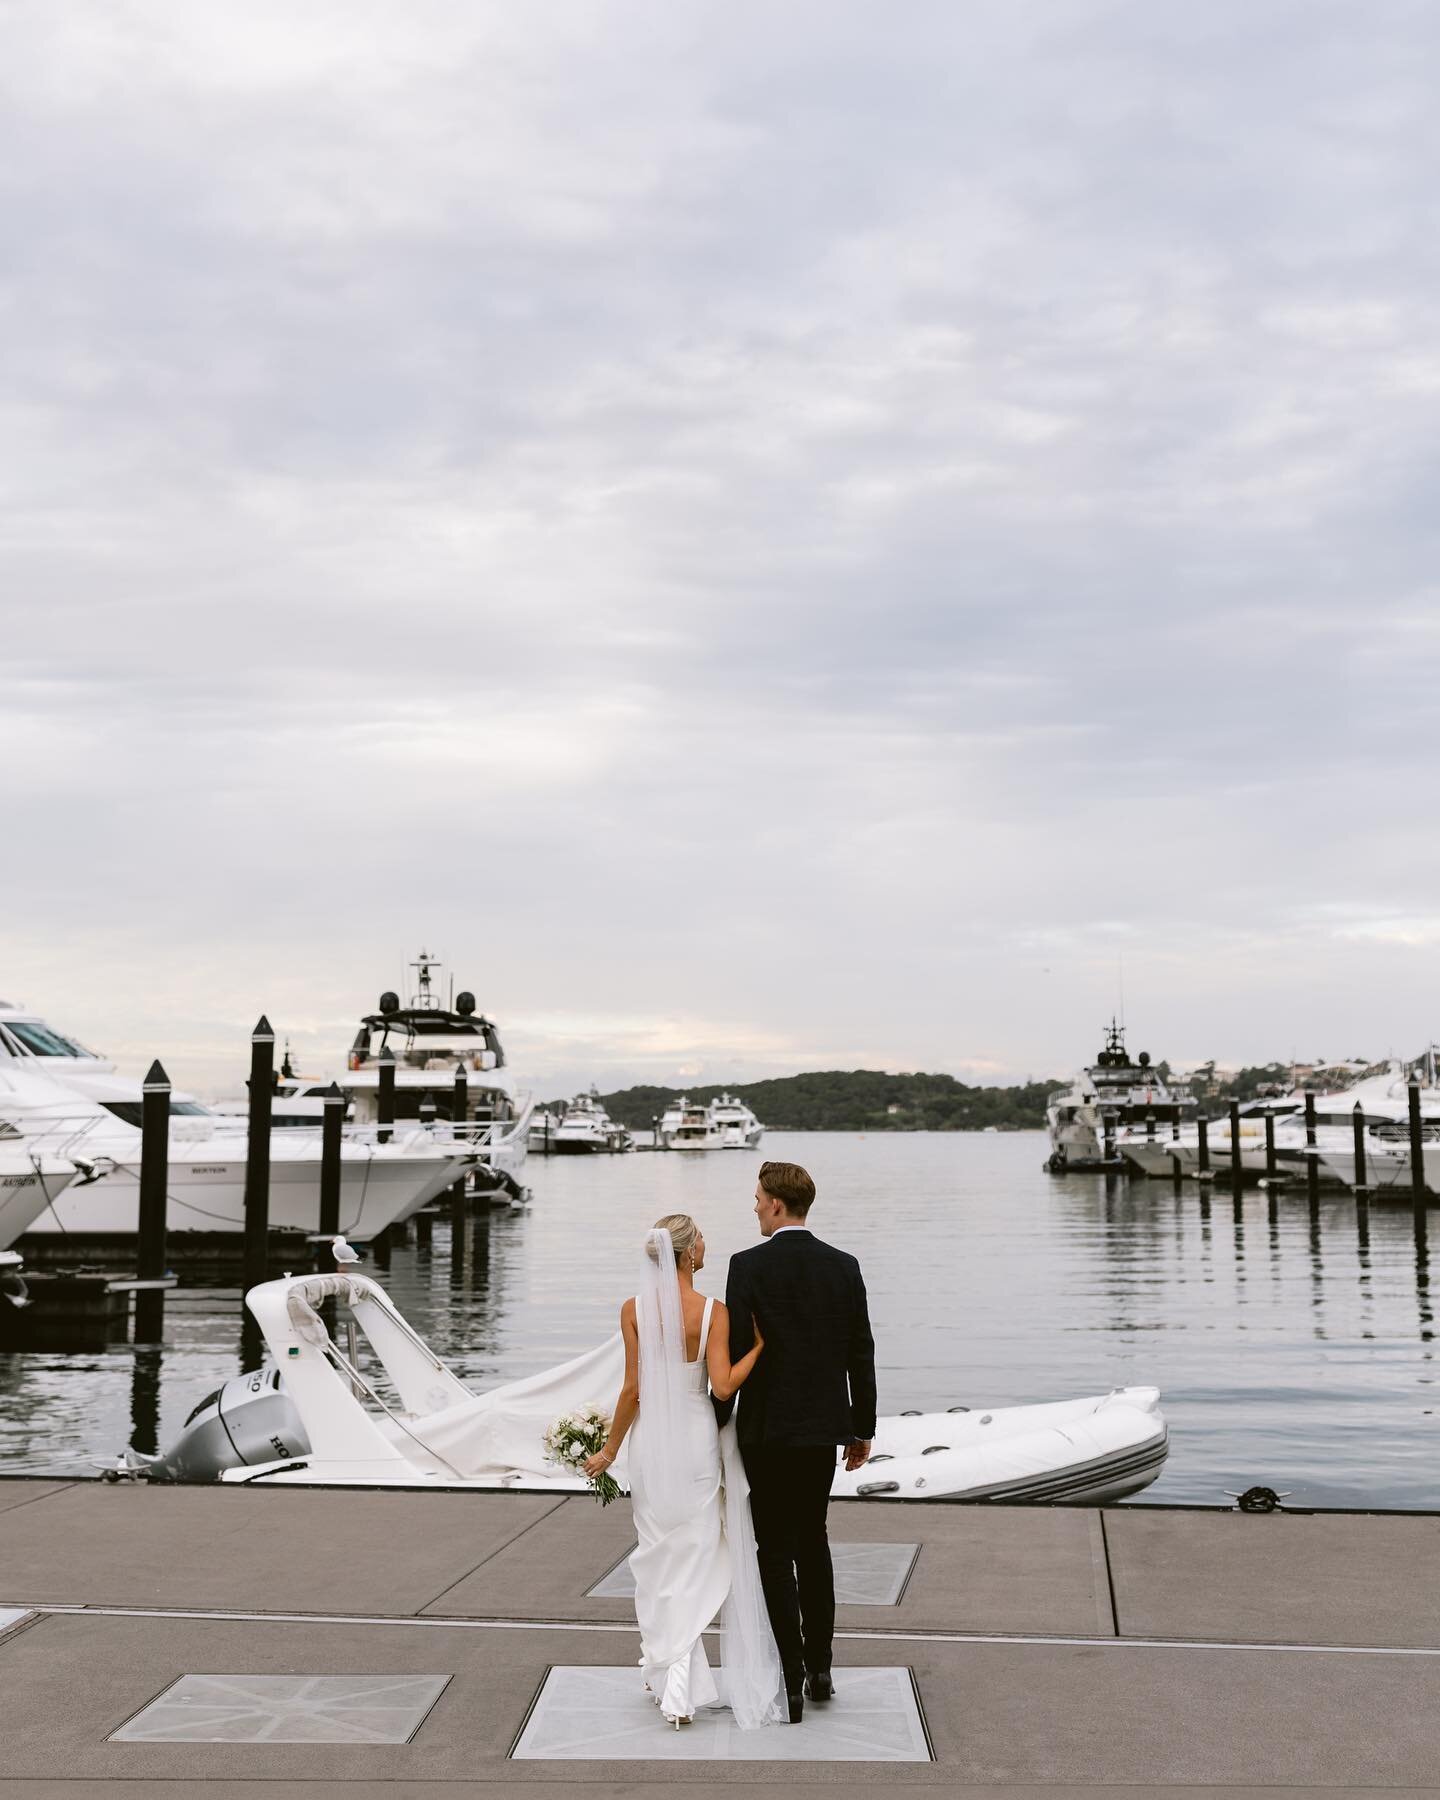 Annabelle + Henry out the front of The Boathouse Rose Bay 🥂🐚

Photo @luminousmoments_